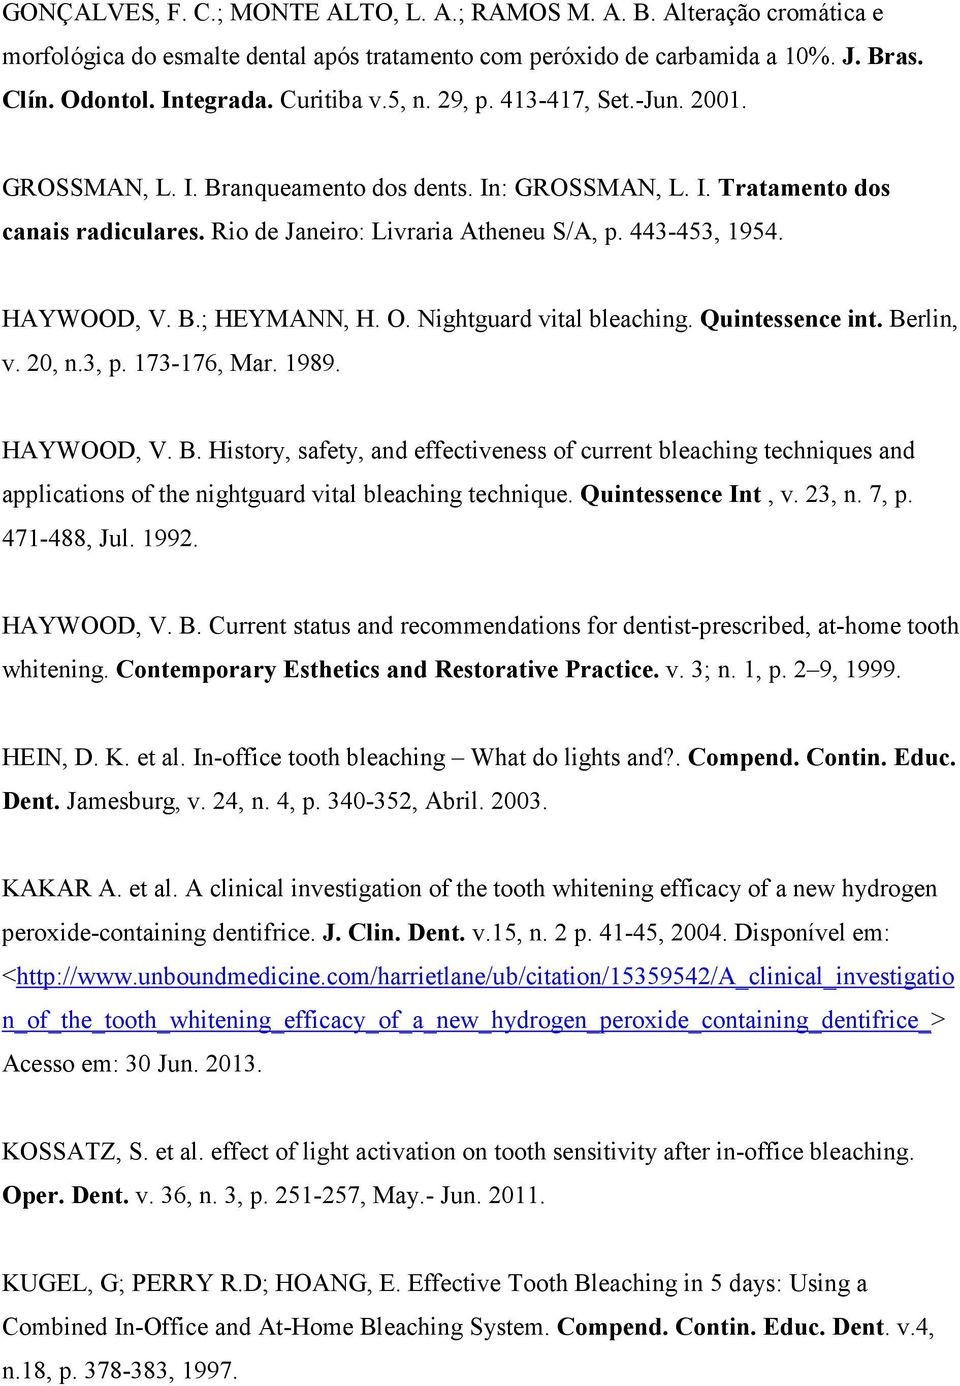 HAYWOOD, V. B.; HEYMANN, H. O. Nightguard vital bleaching. Quintessence int. Berlin, v. 20, n.3, p. 173-176, Mar. 1989. HAYWOOD, V. B. History, safety, and effectiveness of current bleaching techniques and applications of the nightguard vital bleaching technique.